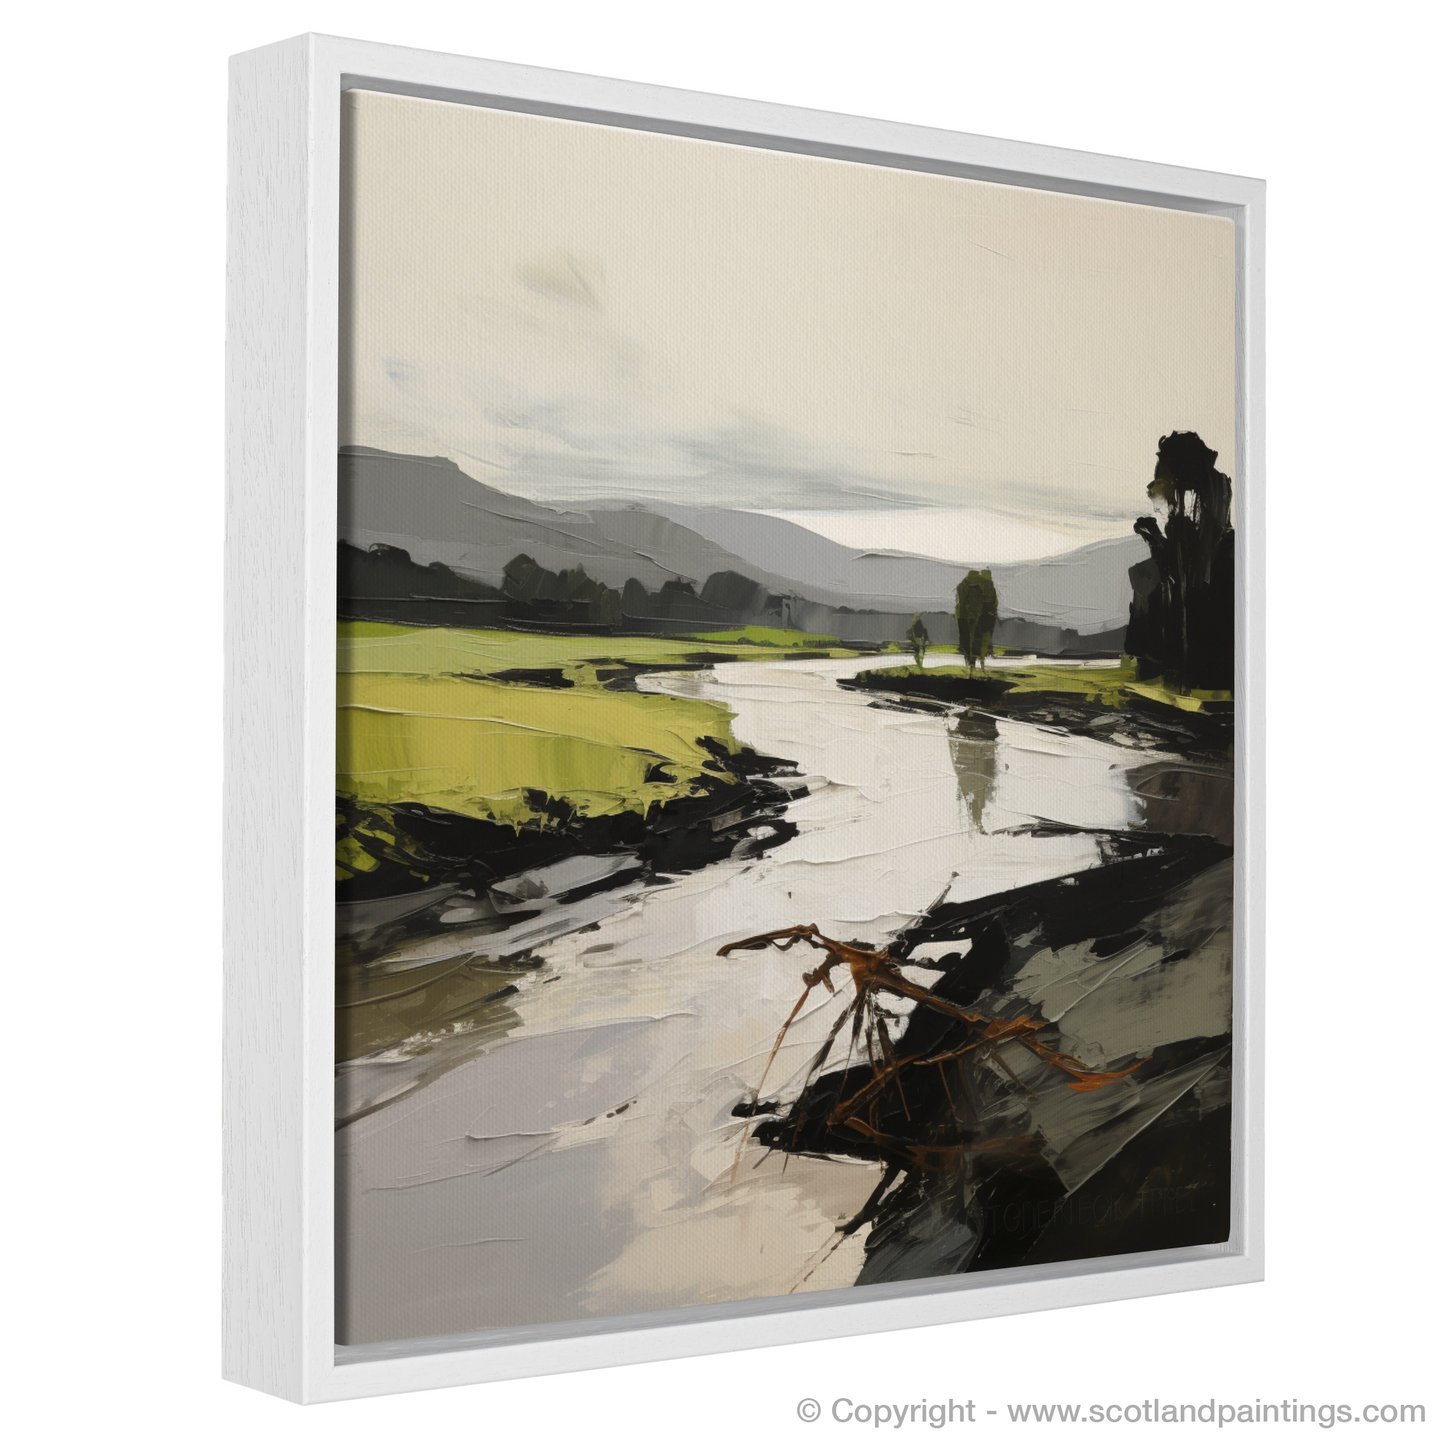 Painting and Art Print of River Leven, West Dunbartonshire entitled "Dynamic Spirit of River Leven: An Expressionist Ode to Scottish Landscape".